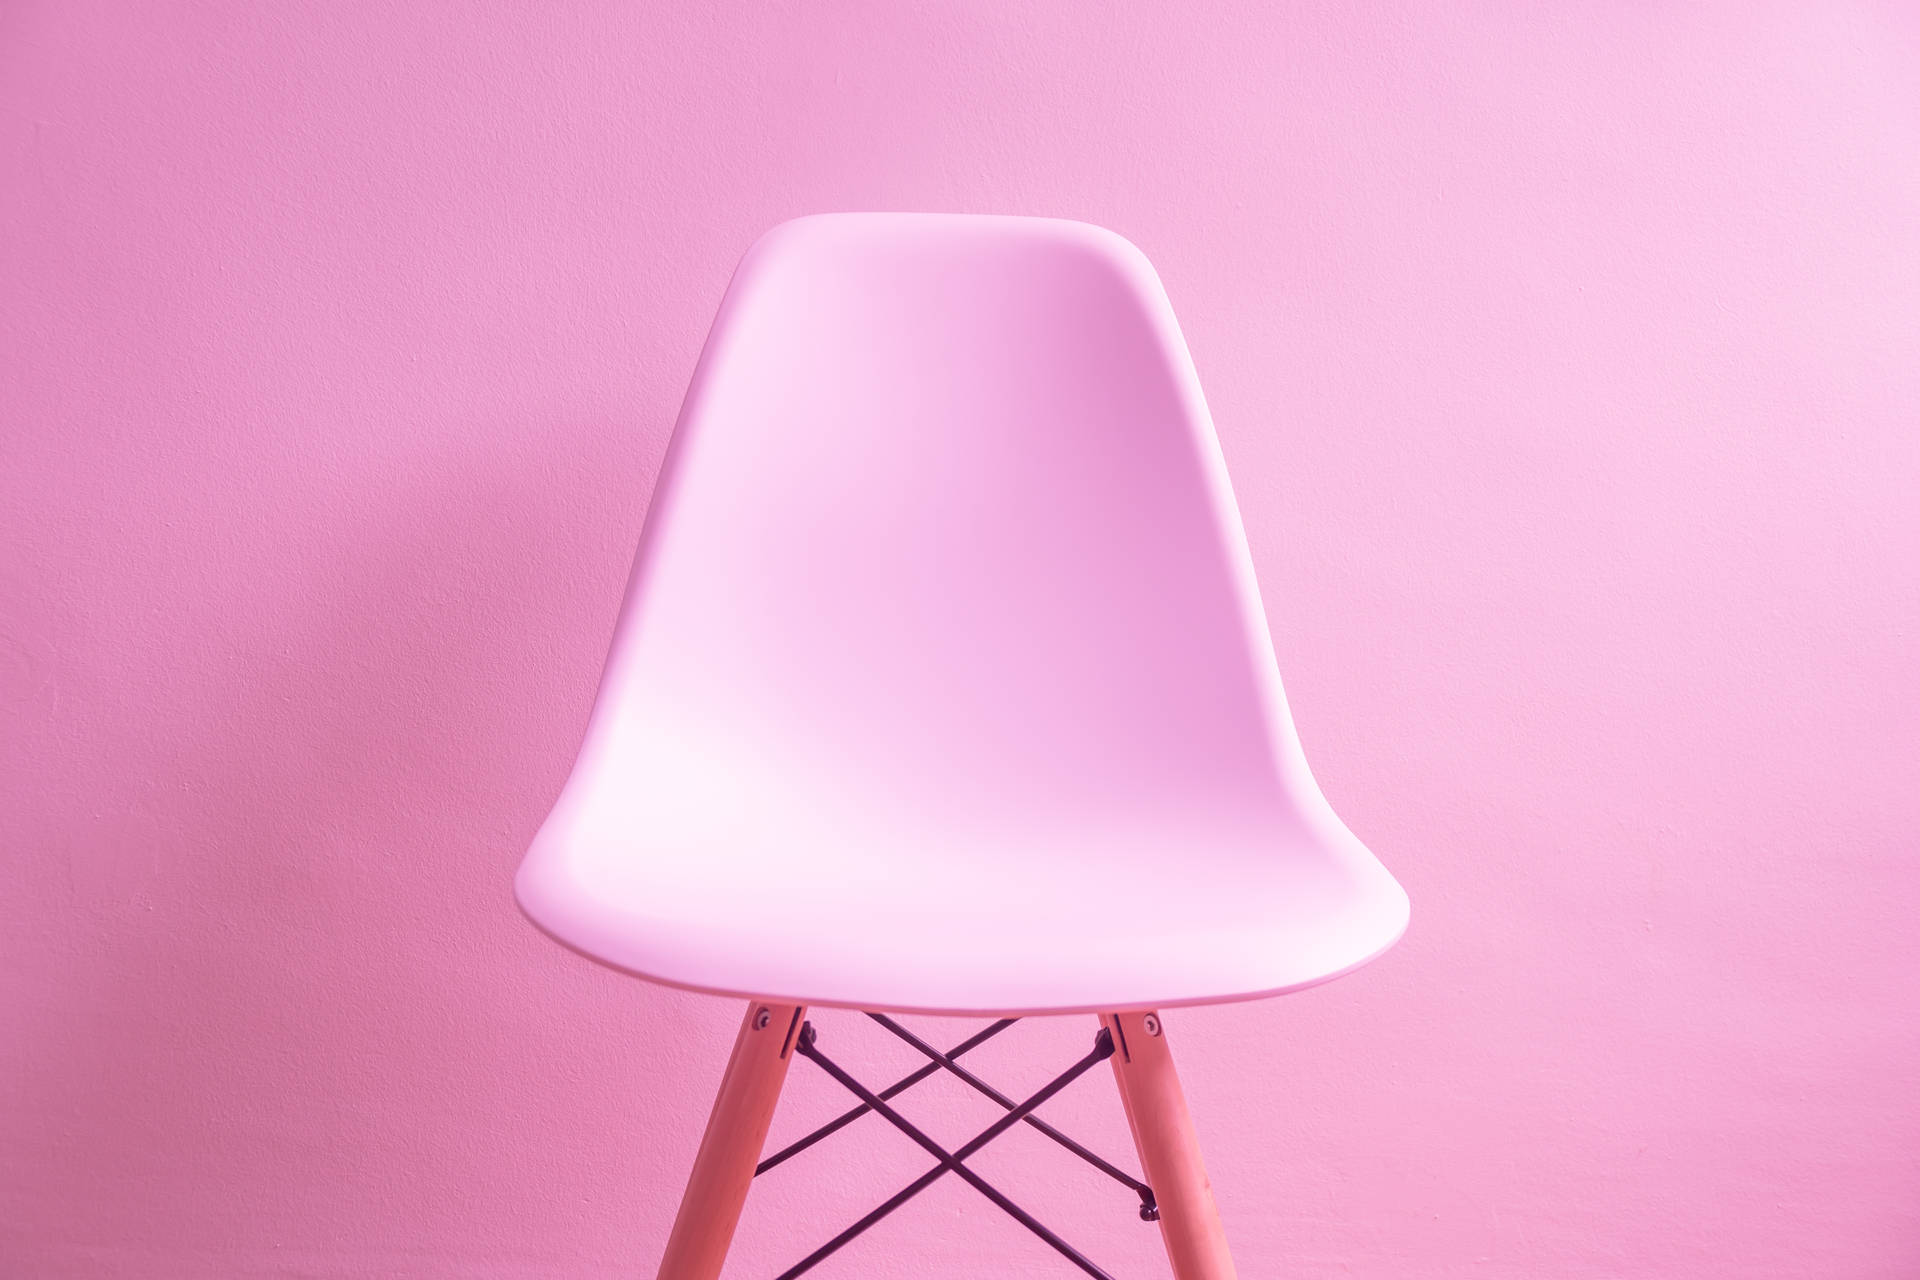 Kawaii Pink Chair On Pink Wall Background